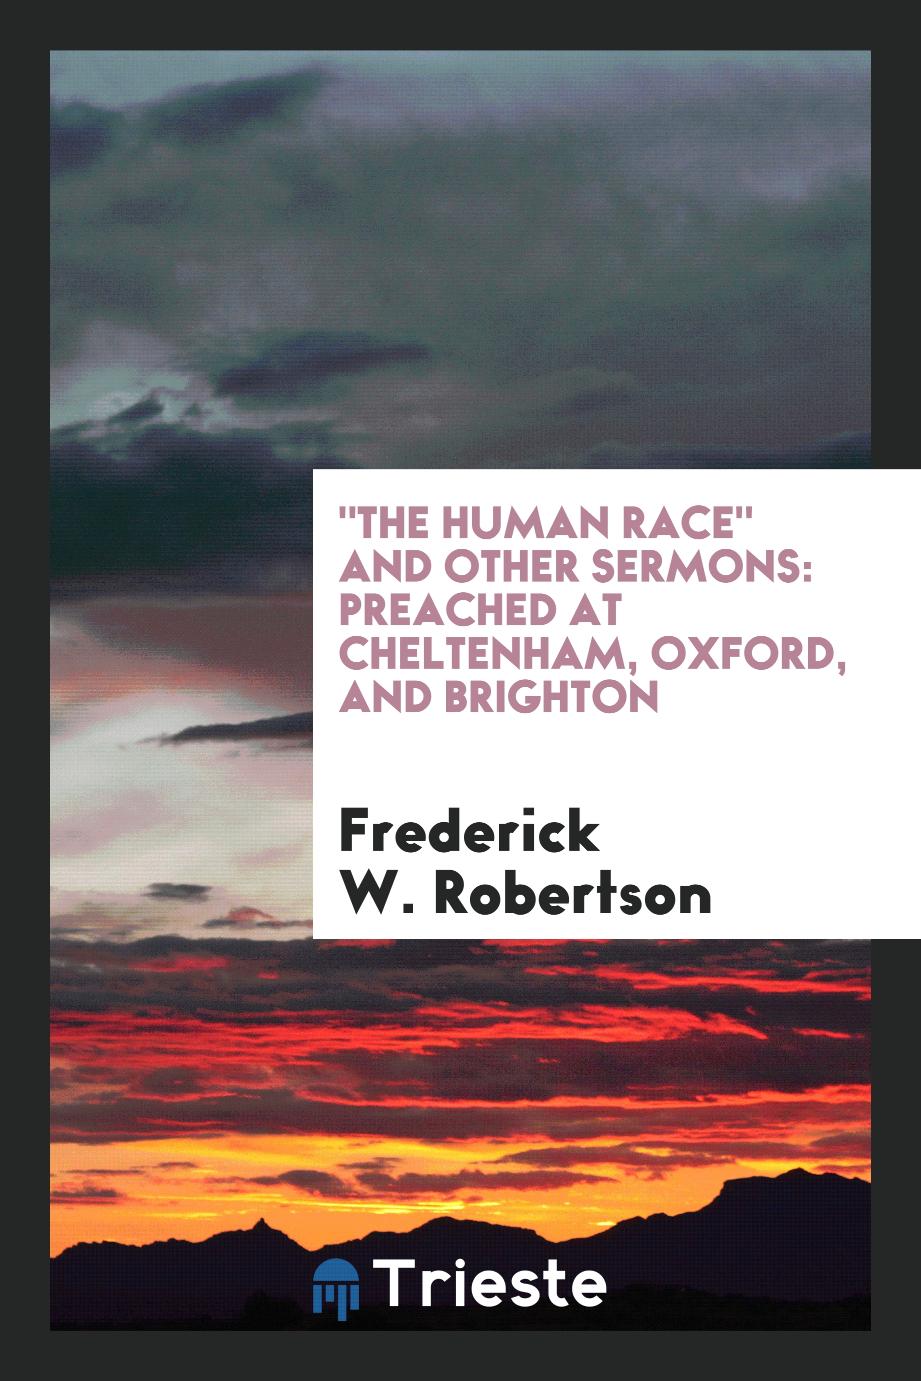 "The Human Race" and Other Sermons: Preached at Cheltenham, Oxford, and Brighton